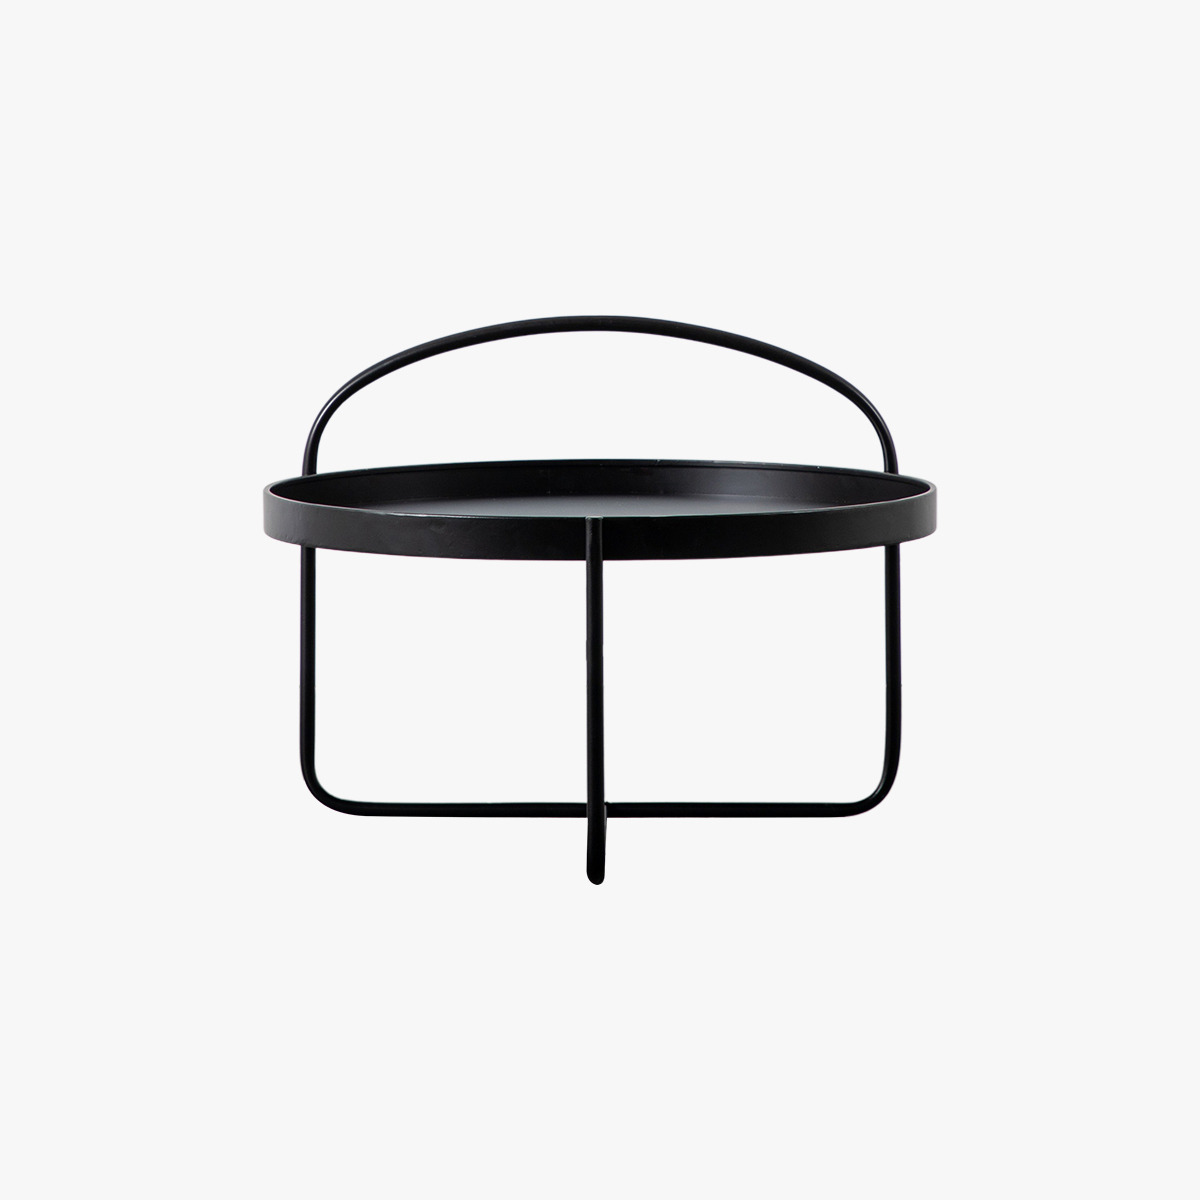 Callie Coffee Table in Black